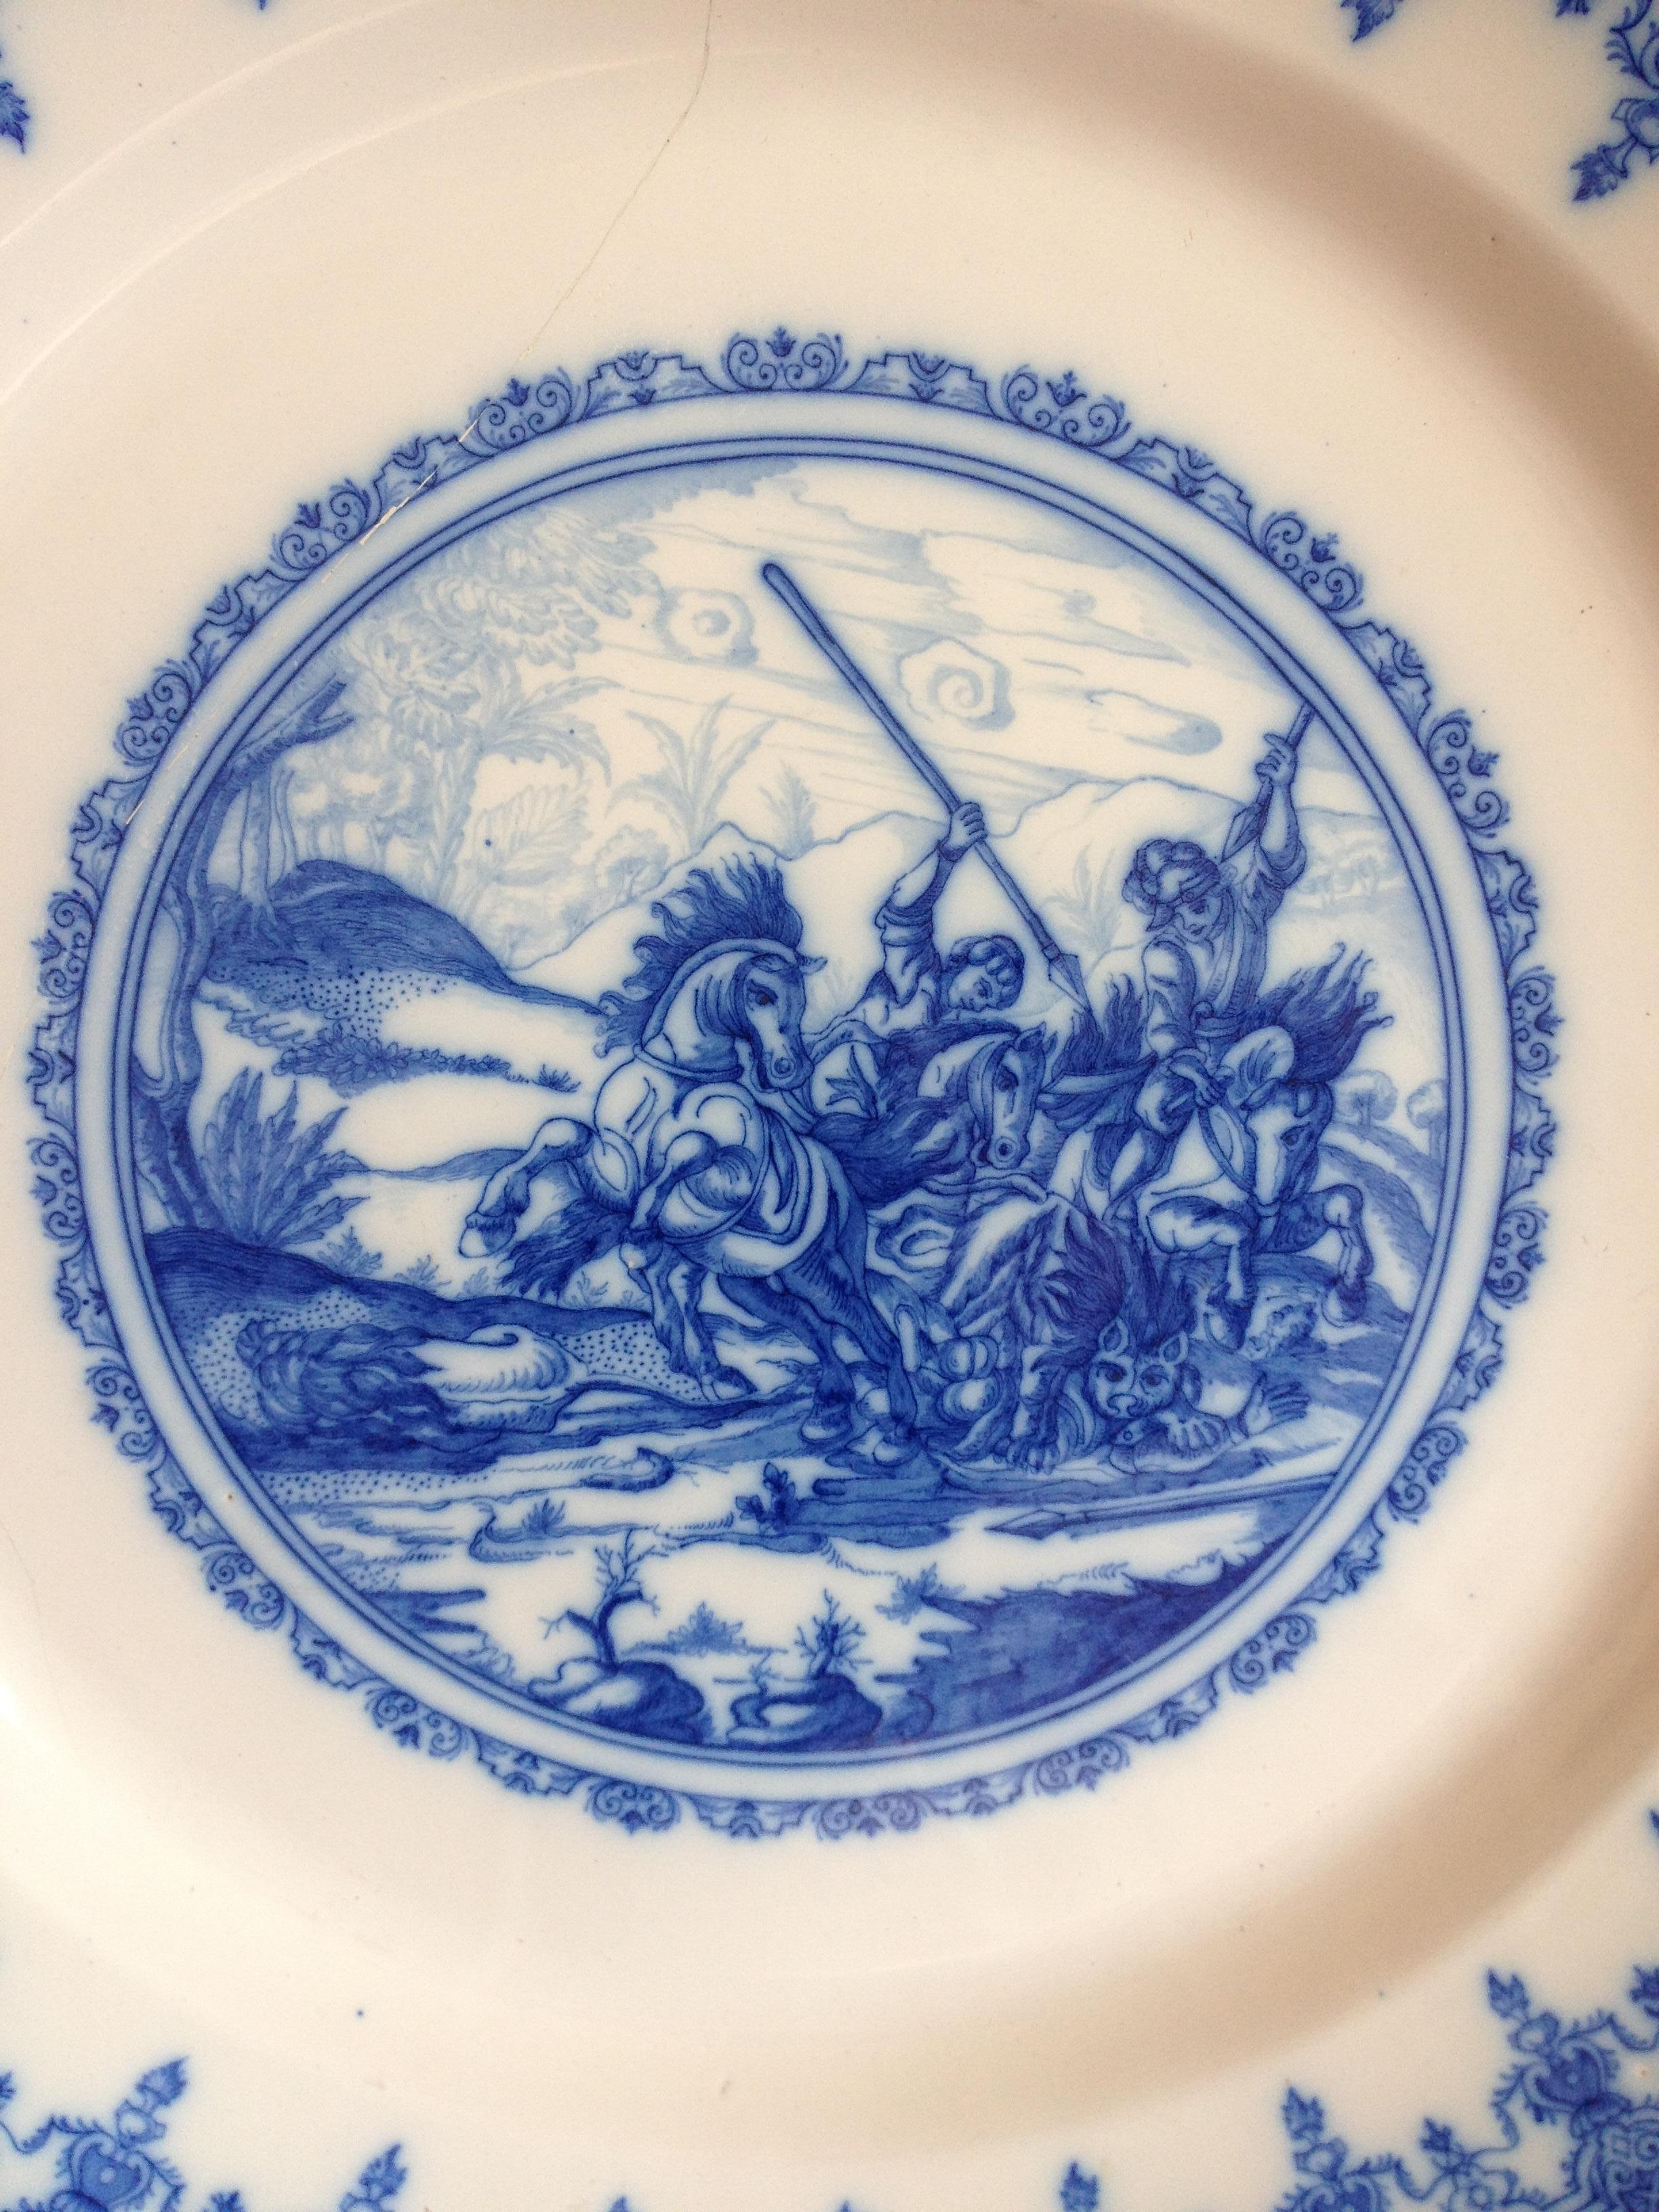 A fine 18th century French blue and white Delft style decorative plate or Chinoiserie style charger. 

This beautiful antique plate is hand-crafted, hand-painted faience from Moustier (France) decorated in blue camaieu, in a circular reserve